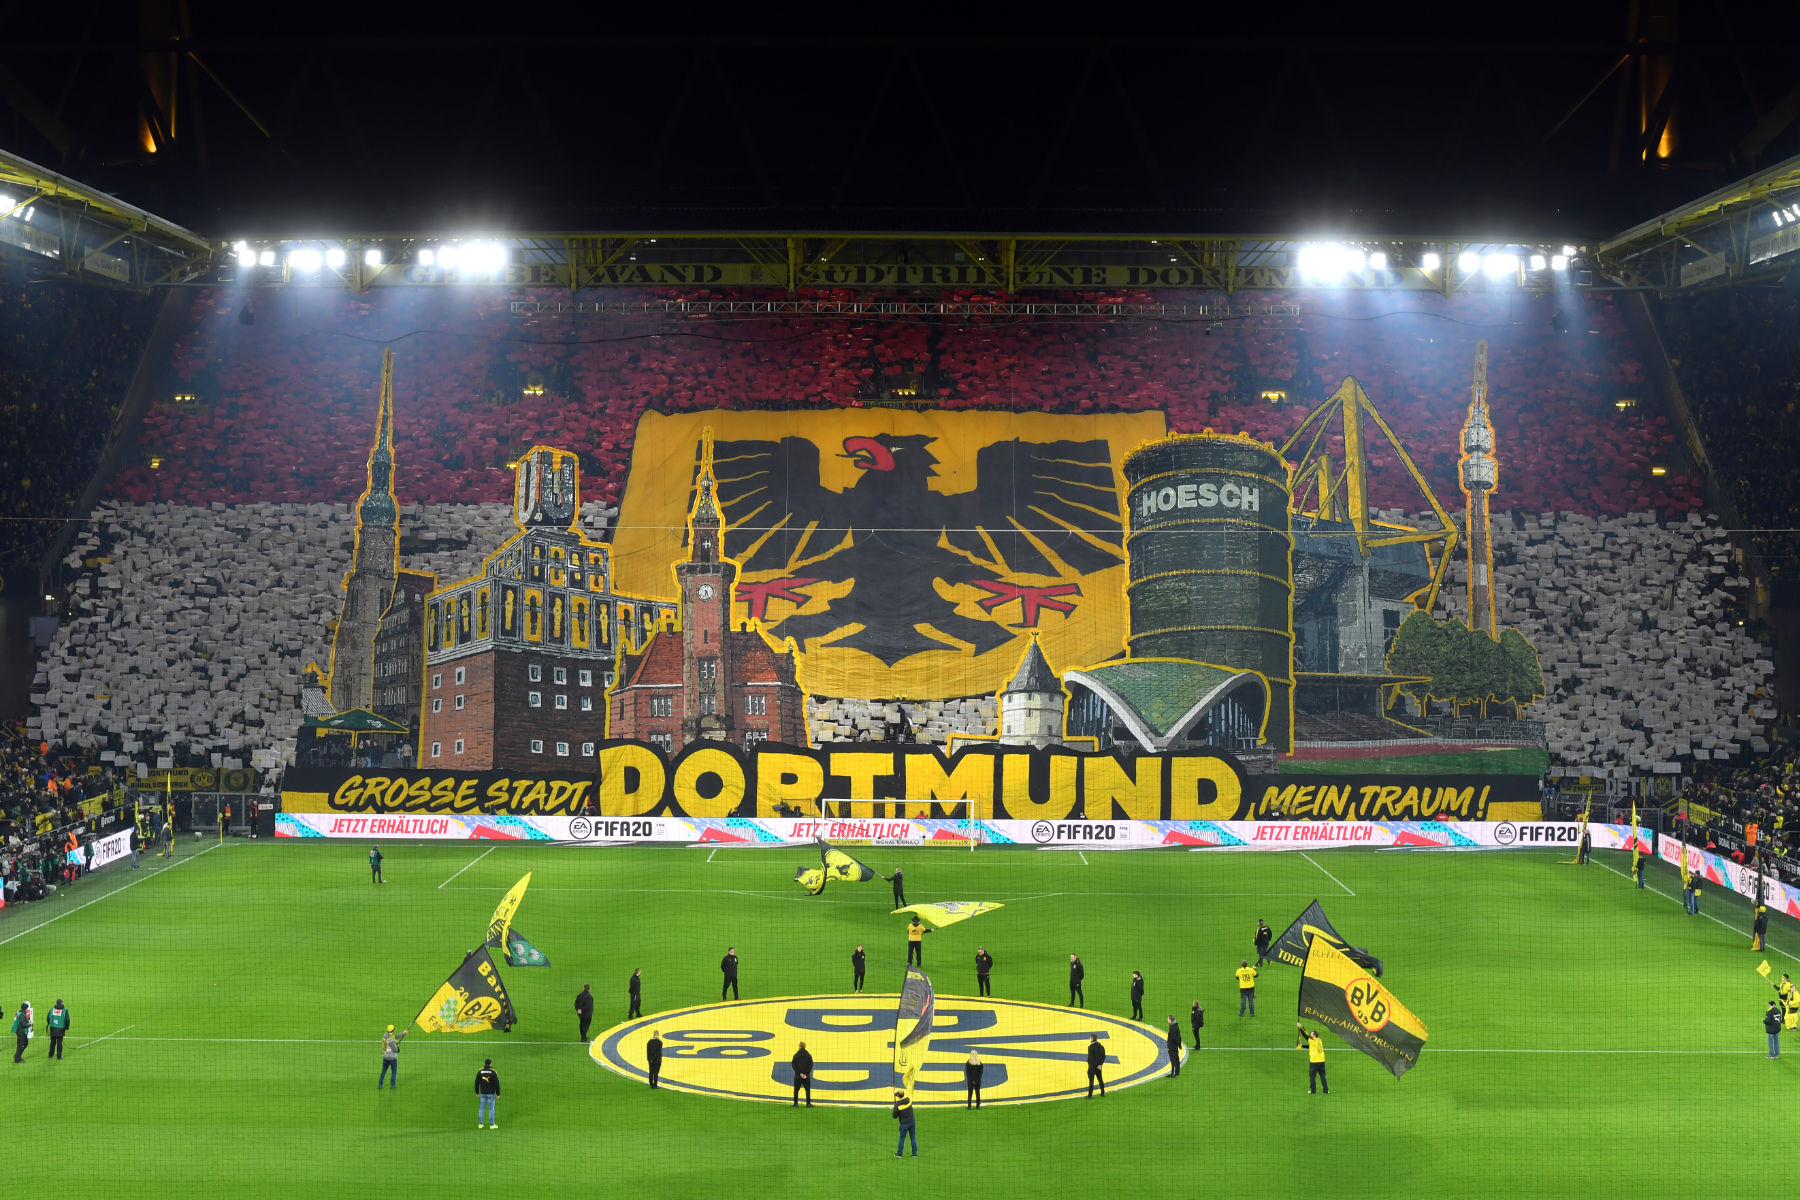 PSG Talking Podcast Dortmund Supporter Shares What Scares Him the Most